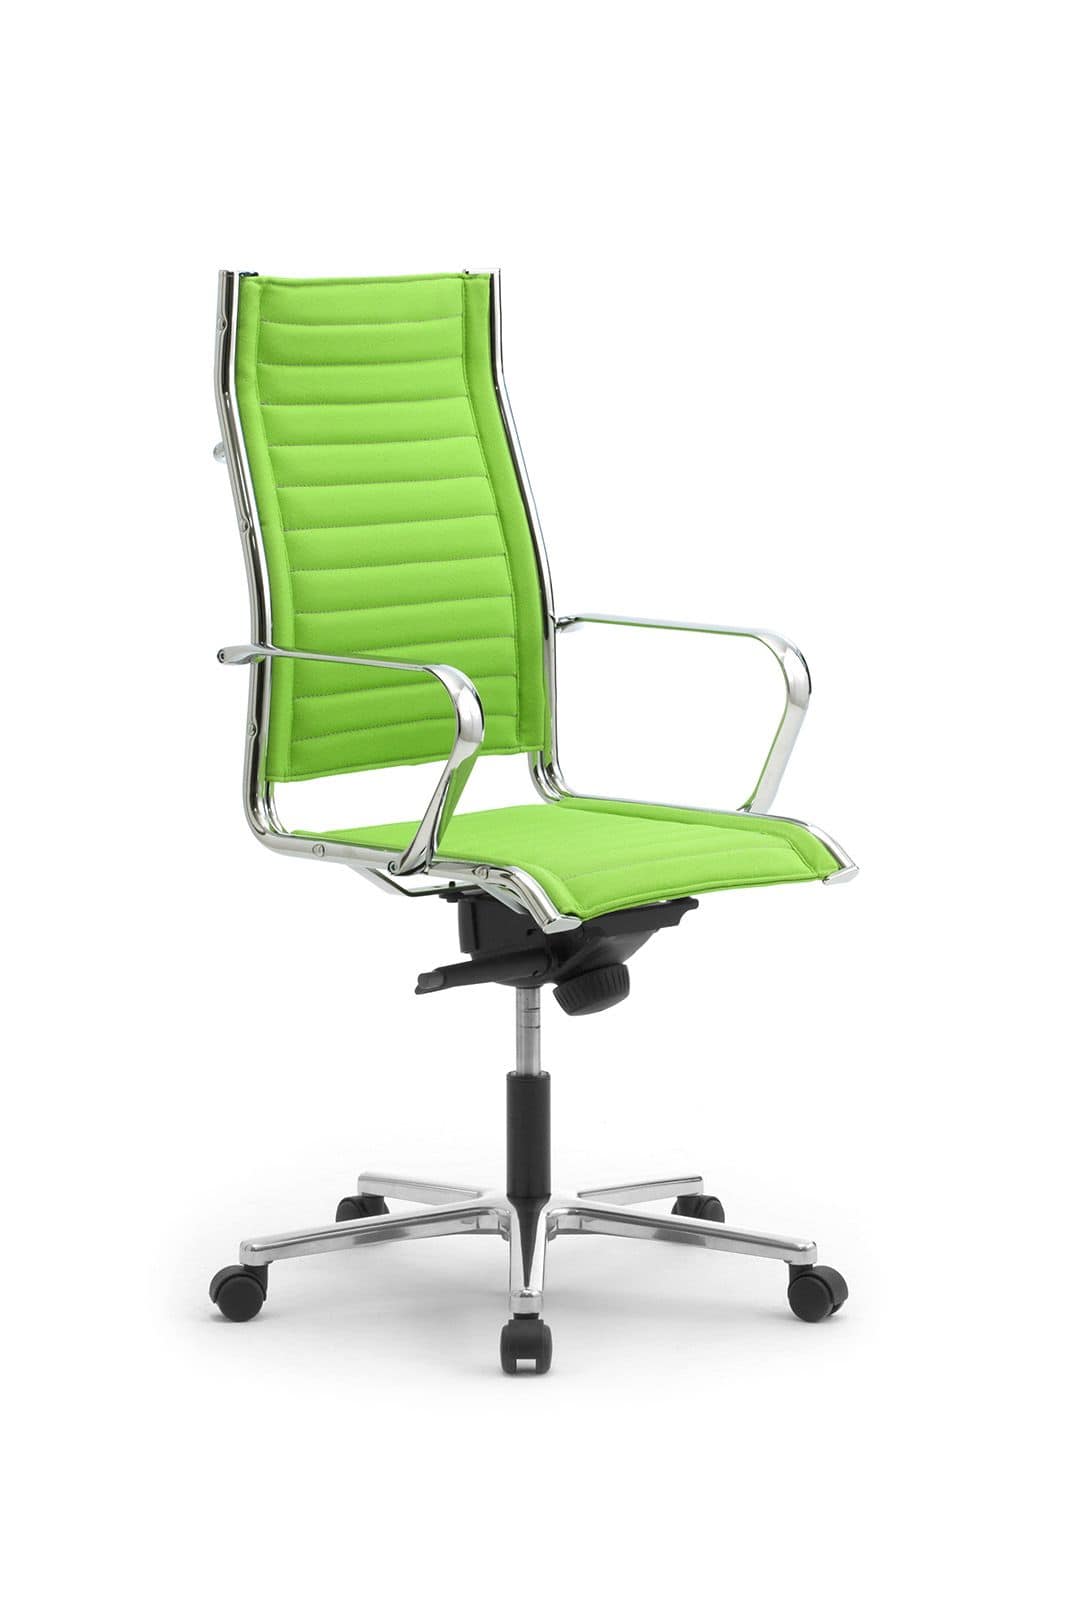 Origami TD high executive 70010, Swivel chair on wheels, adjustable height, for offices